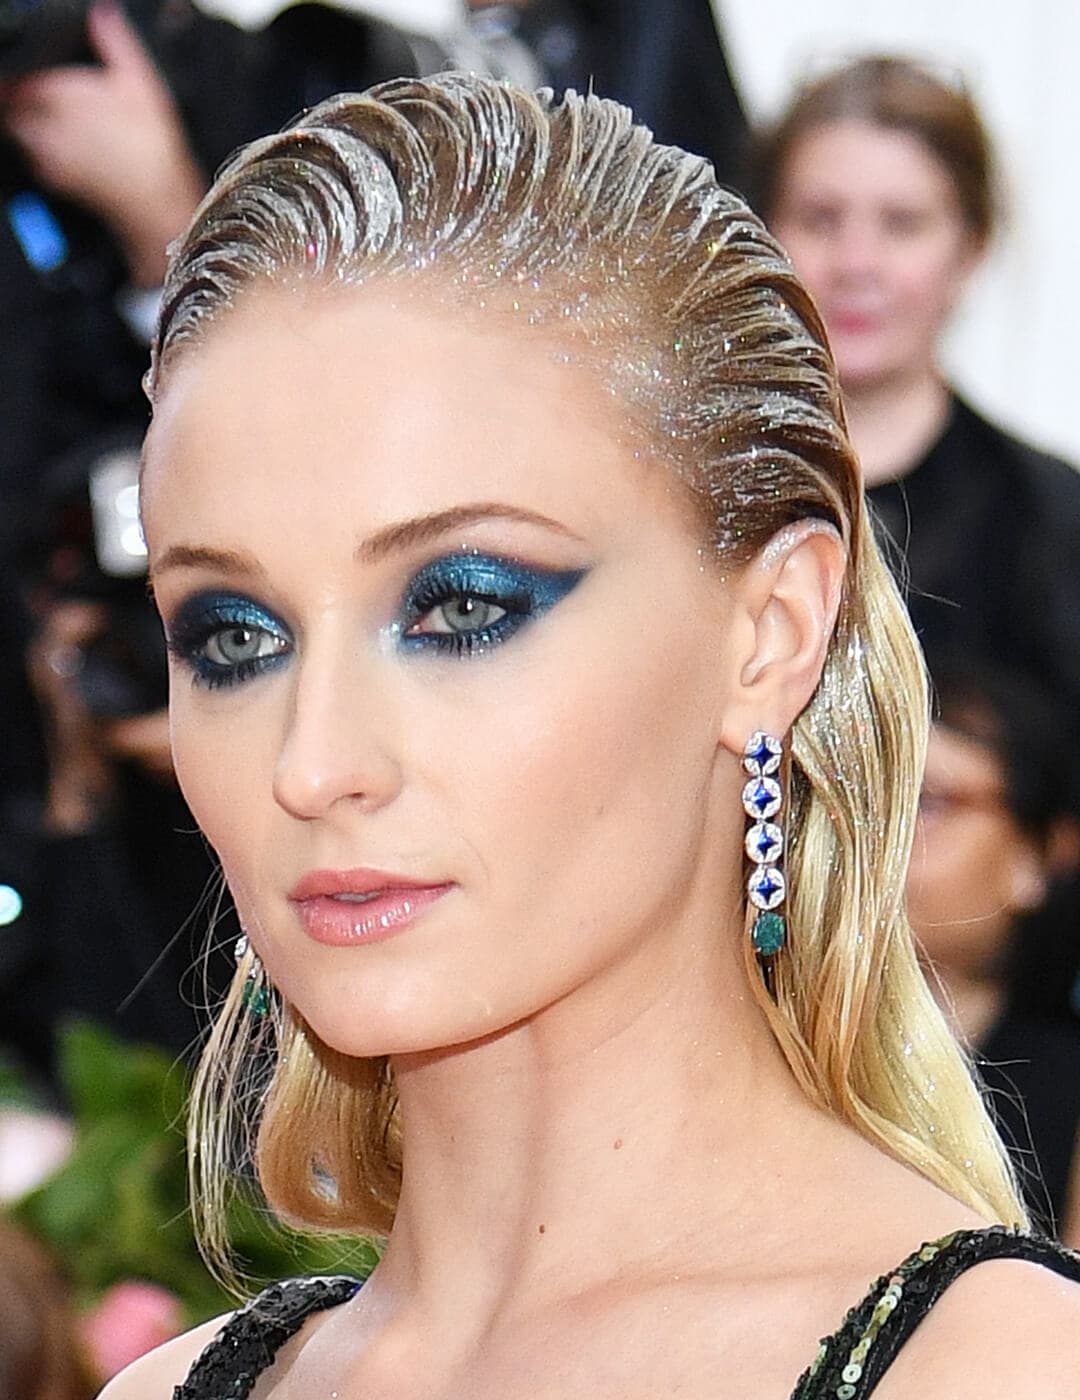 Sophie Turner looking glam in a metallic blue eyeshadow makeup look and silver hair accents on the 2019 Met Gala red carpet